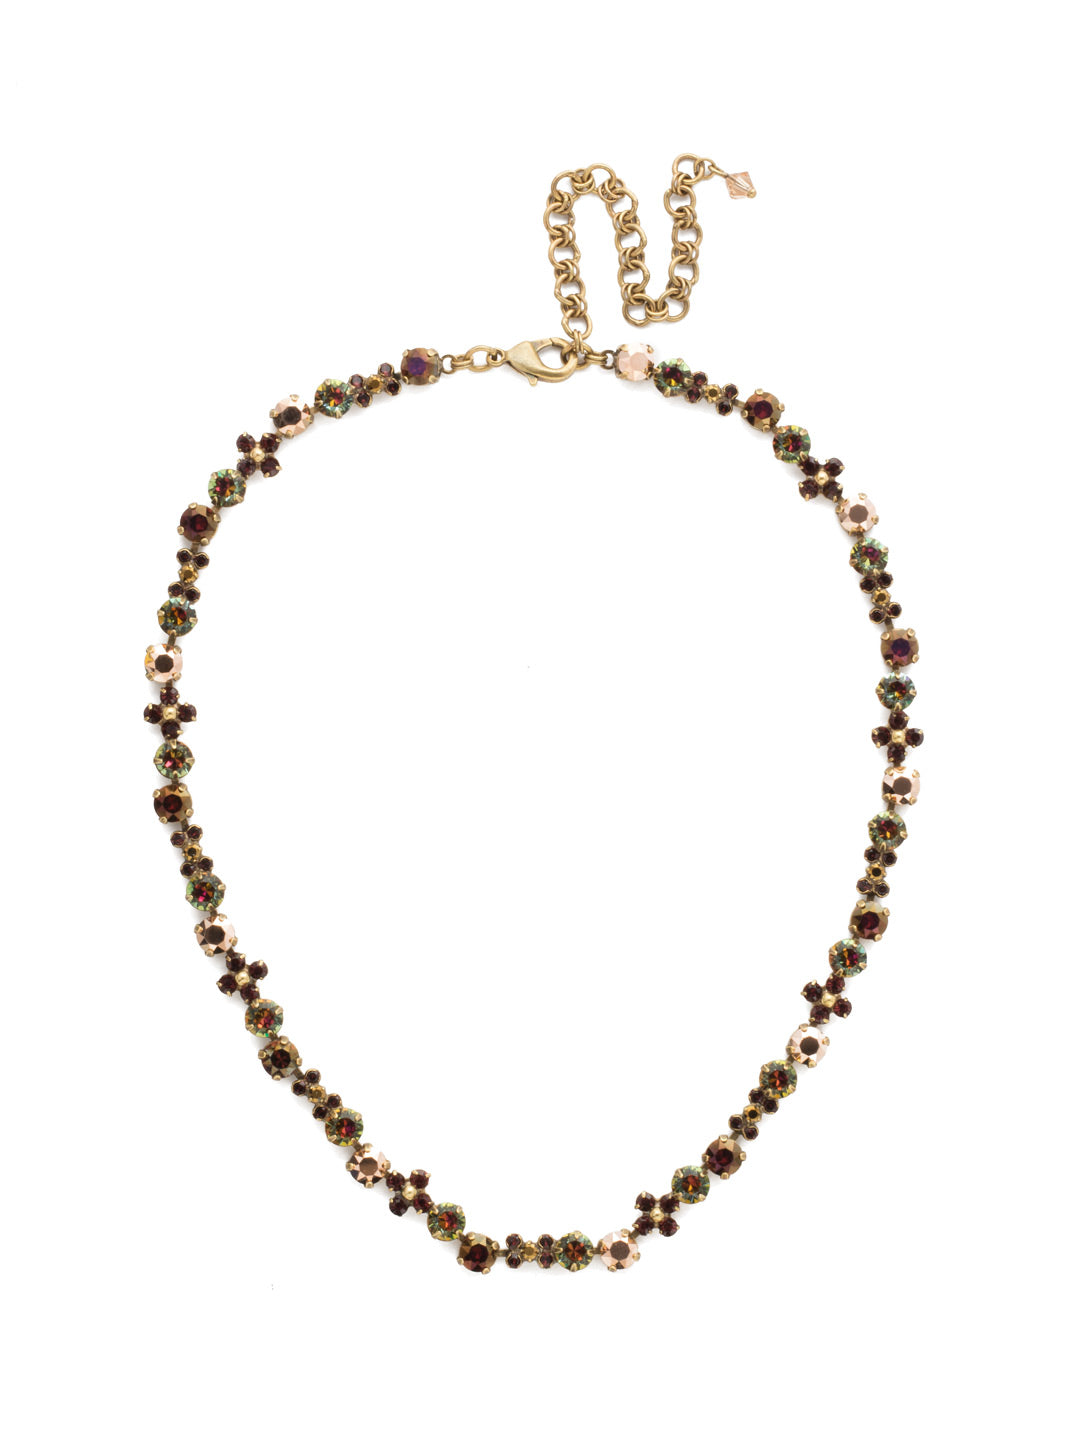 Enya Tennis Necklace - NDQ39AGM - A classic Sorrelli style to make a statement or wear everyday. From Sorrelli's Mahogany collection in our Antique Gold-tone finish.